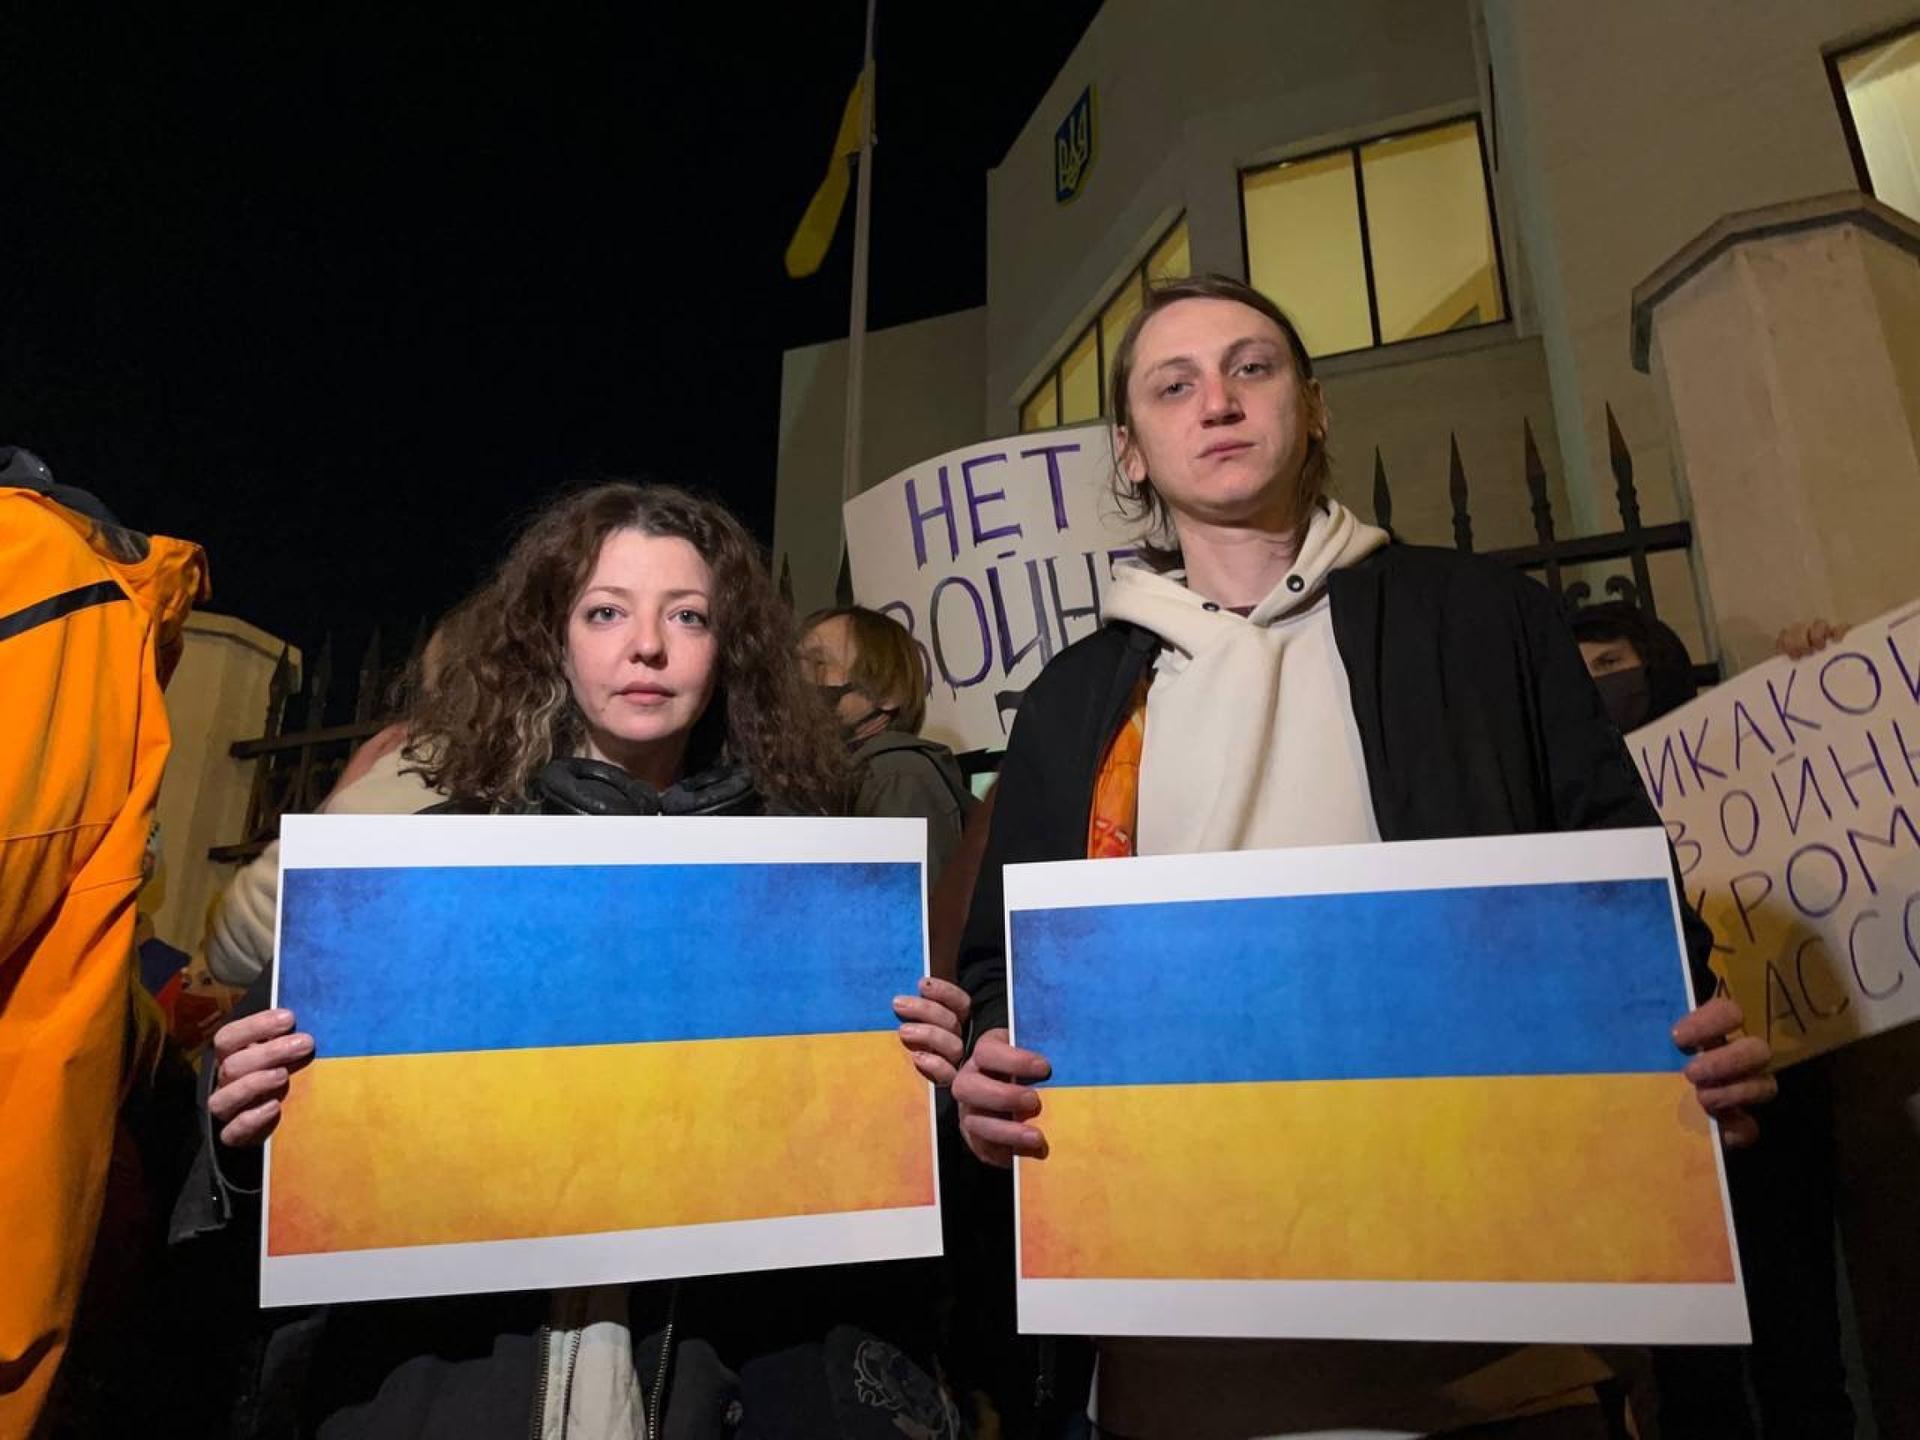 Alina Muzychenko, 36, and Egor Eremeev, 34, protest the war in Ukraine from their new home in Tbilisi, Georgia. `